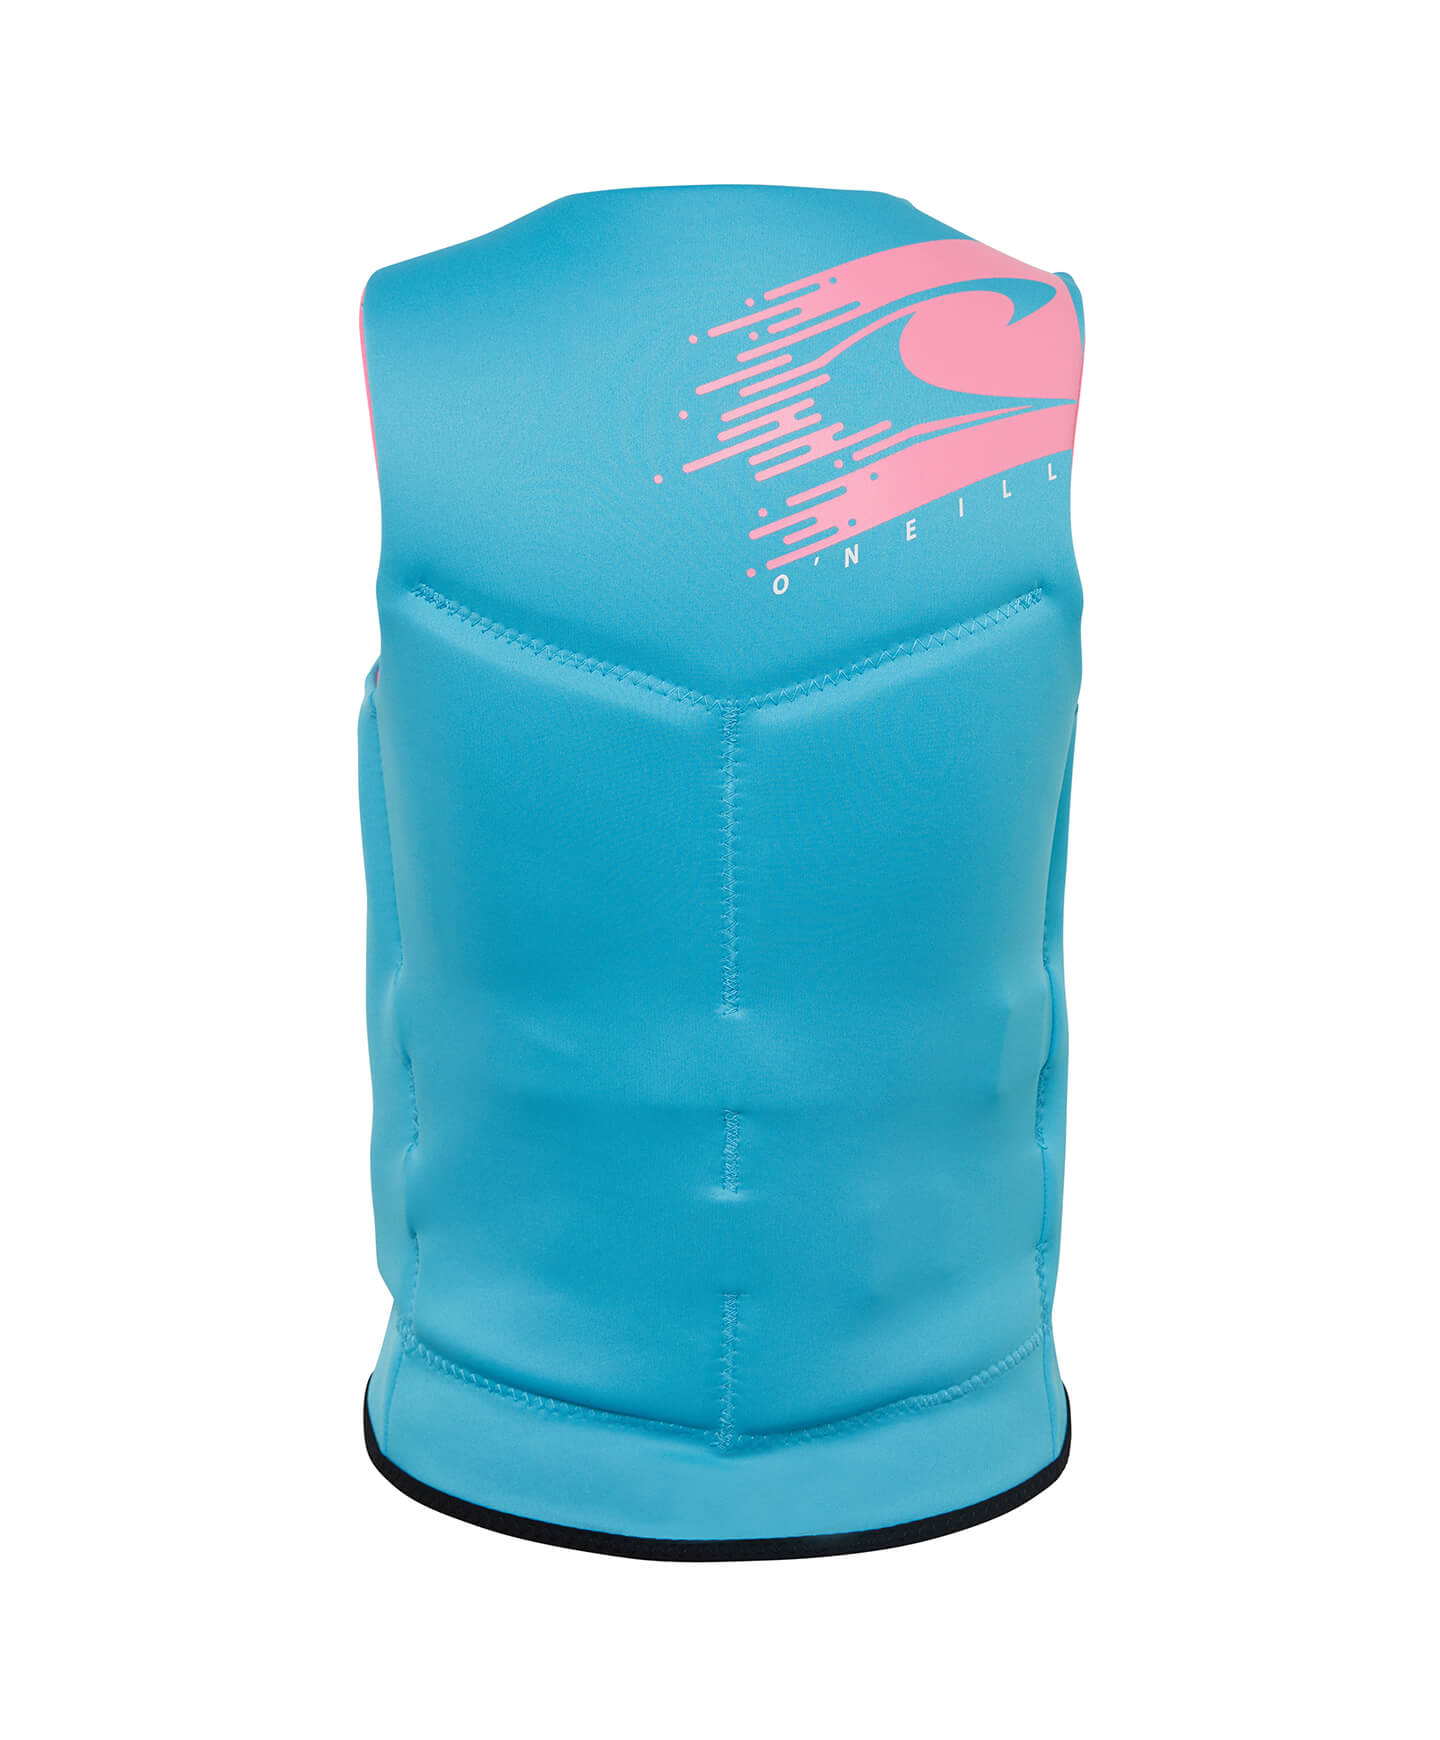 Teen Reactor L50S Life Jacket - Turquoise